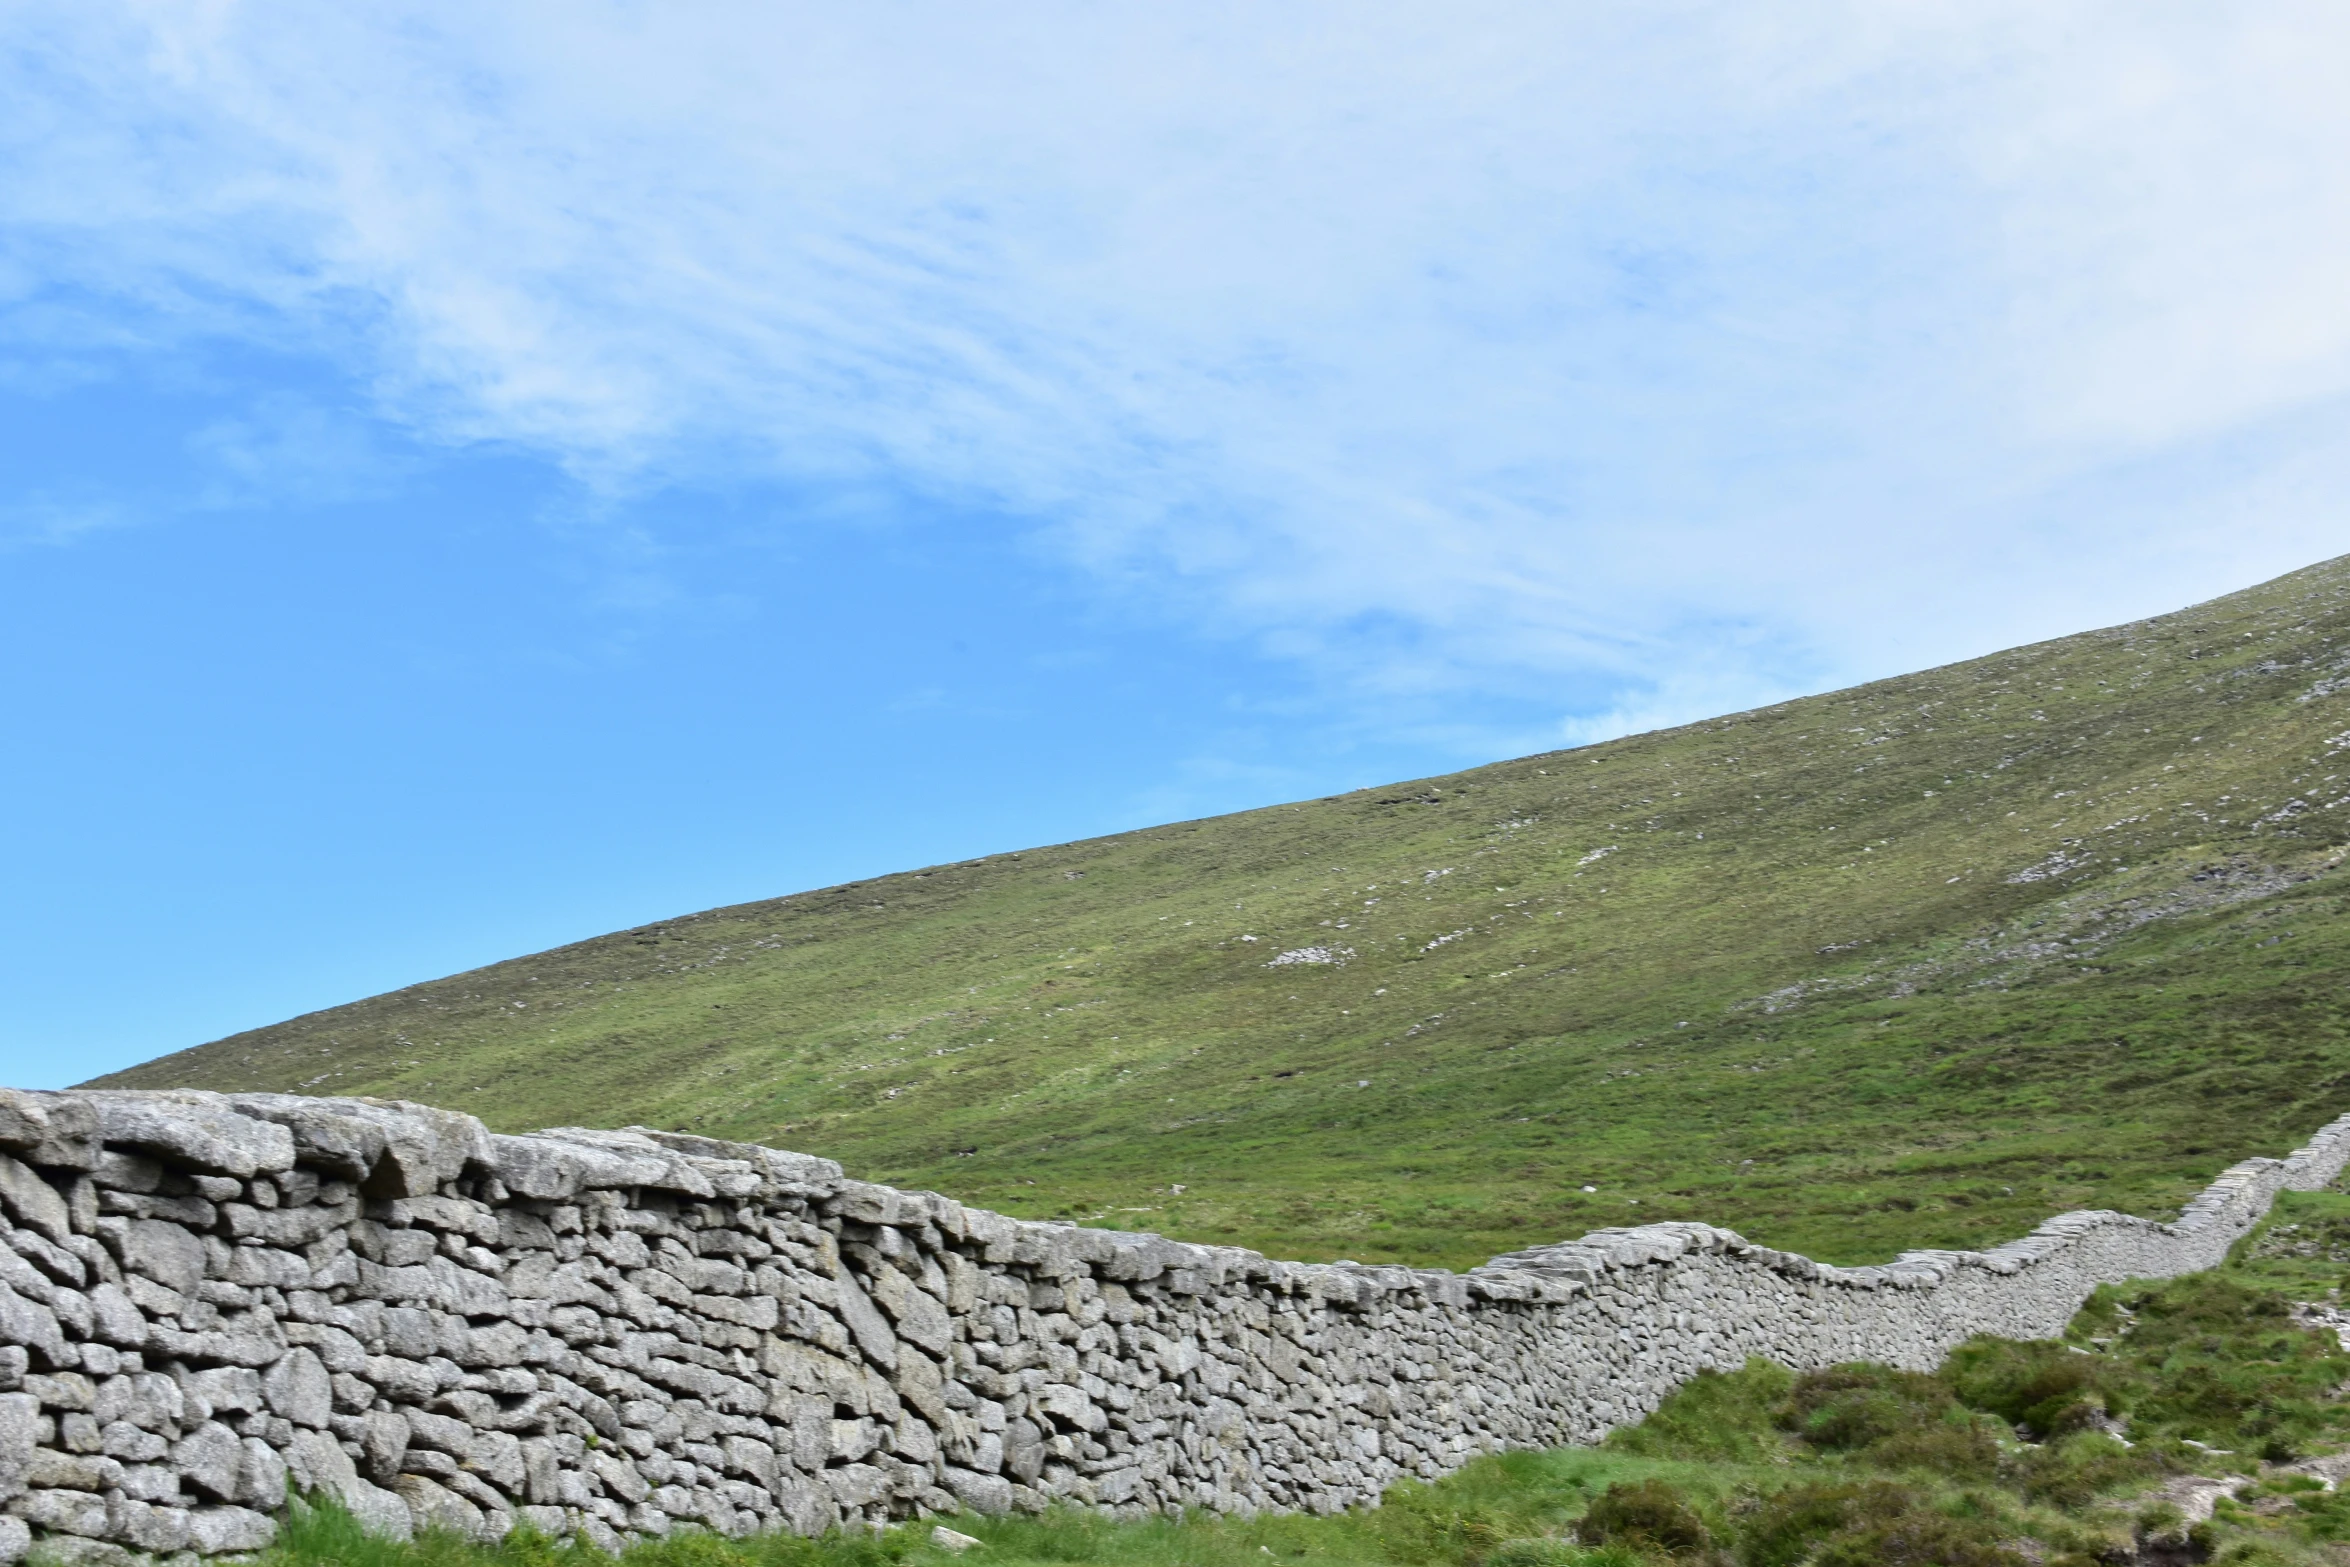 a lone sheep walking on the side of a stone wall